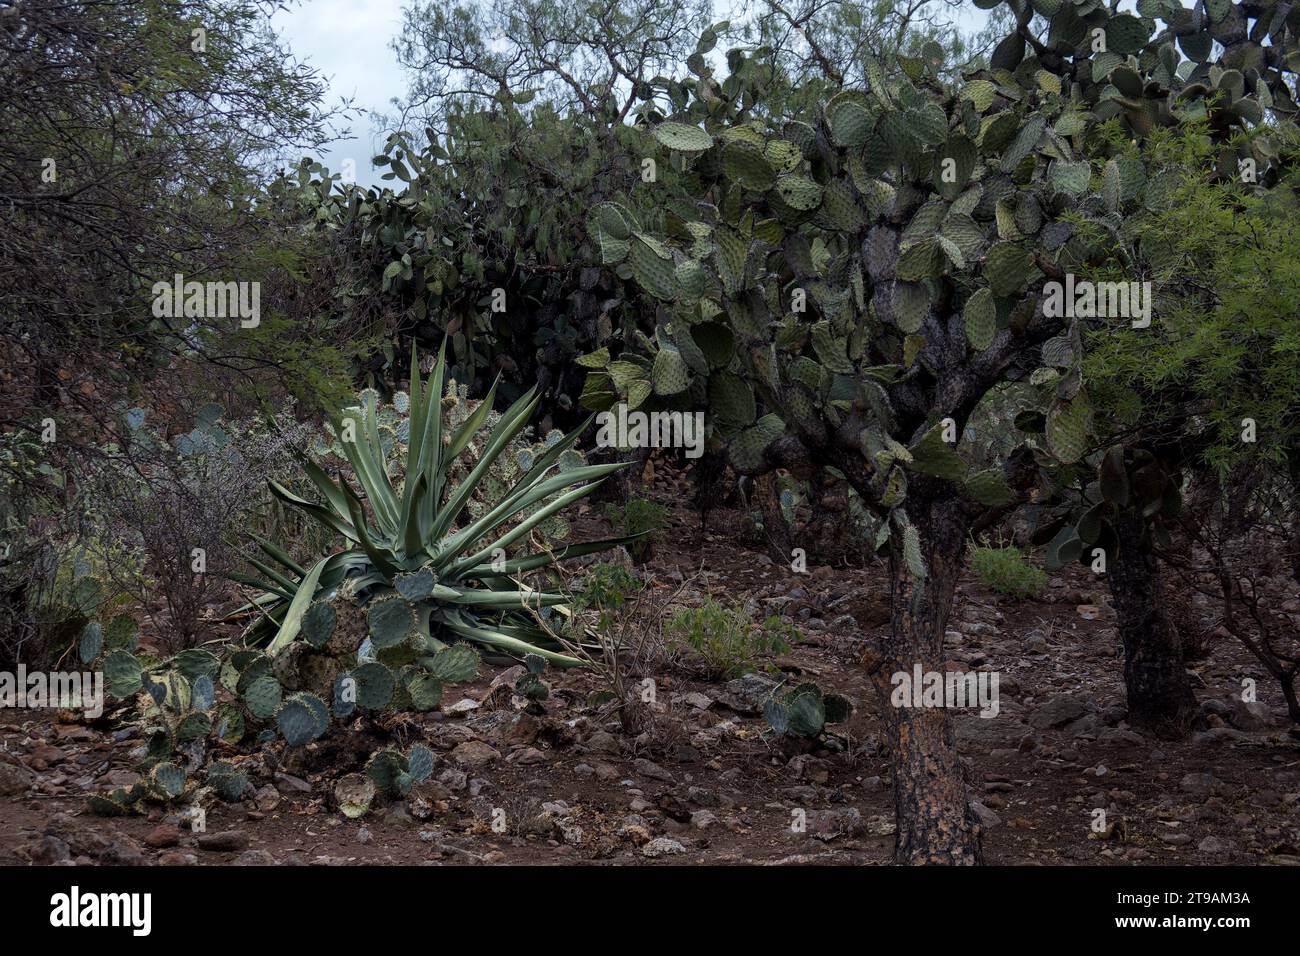 A Mexican landscape with Opuntia leucotricha, Agave salmiana and rocky ground Stock Photo